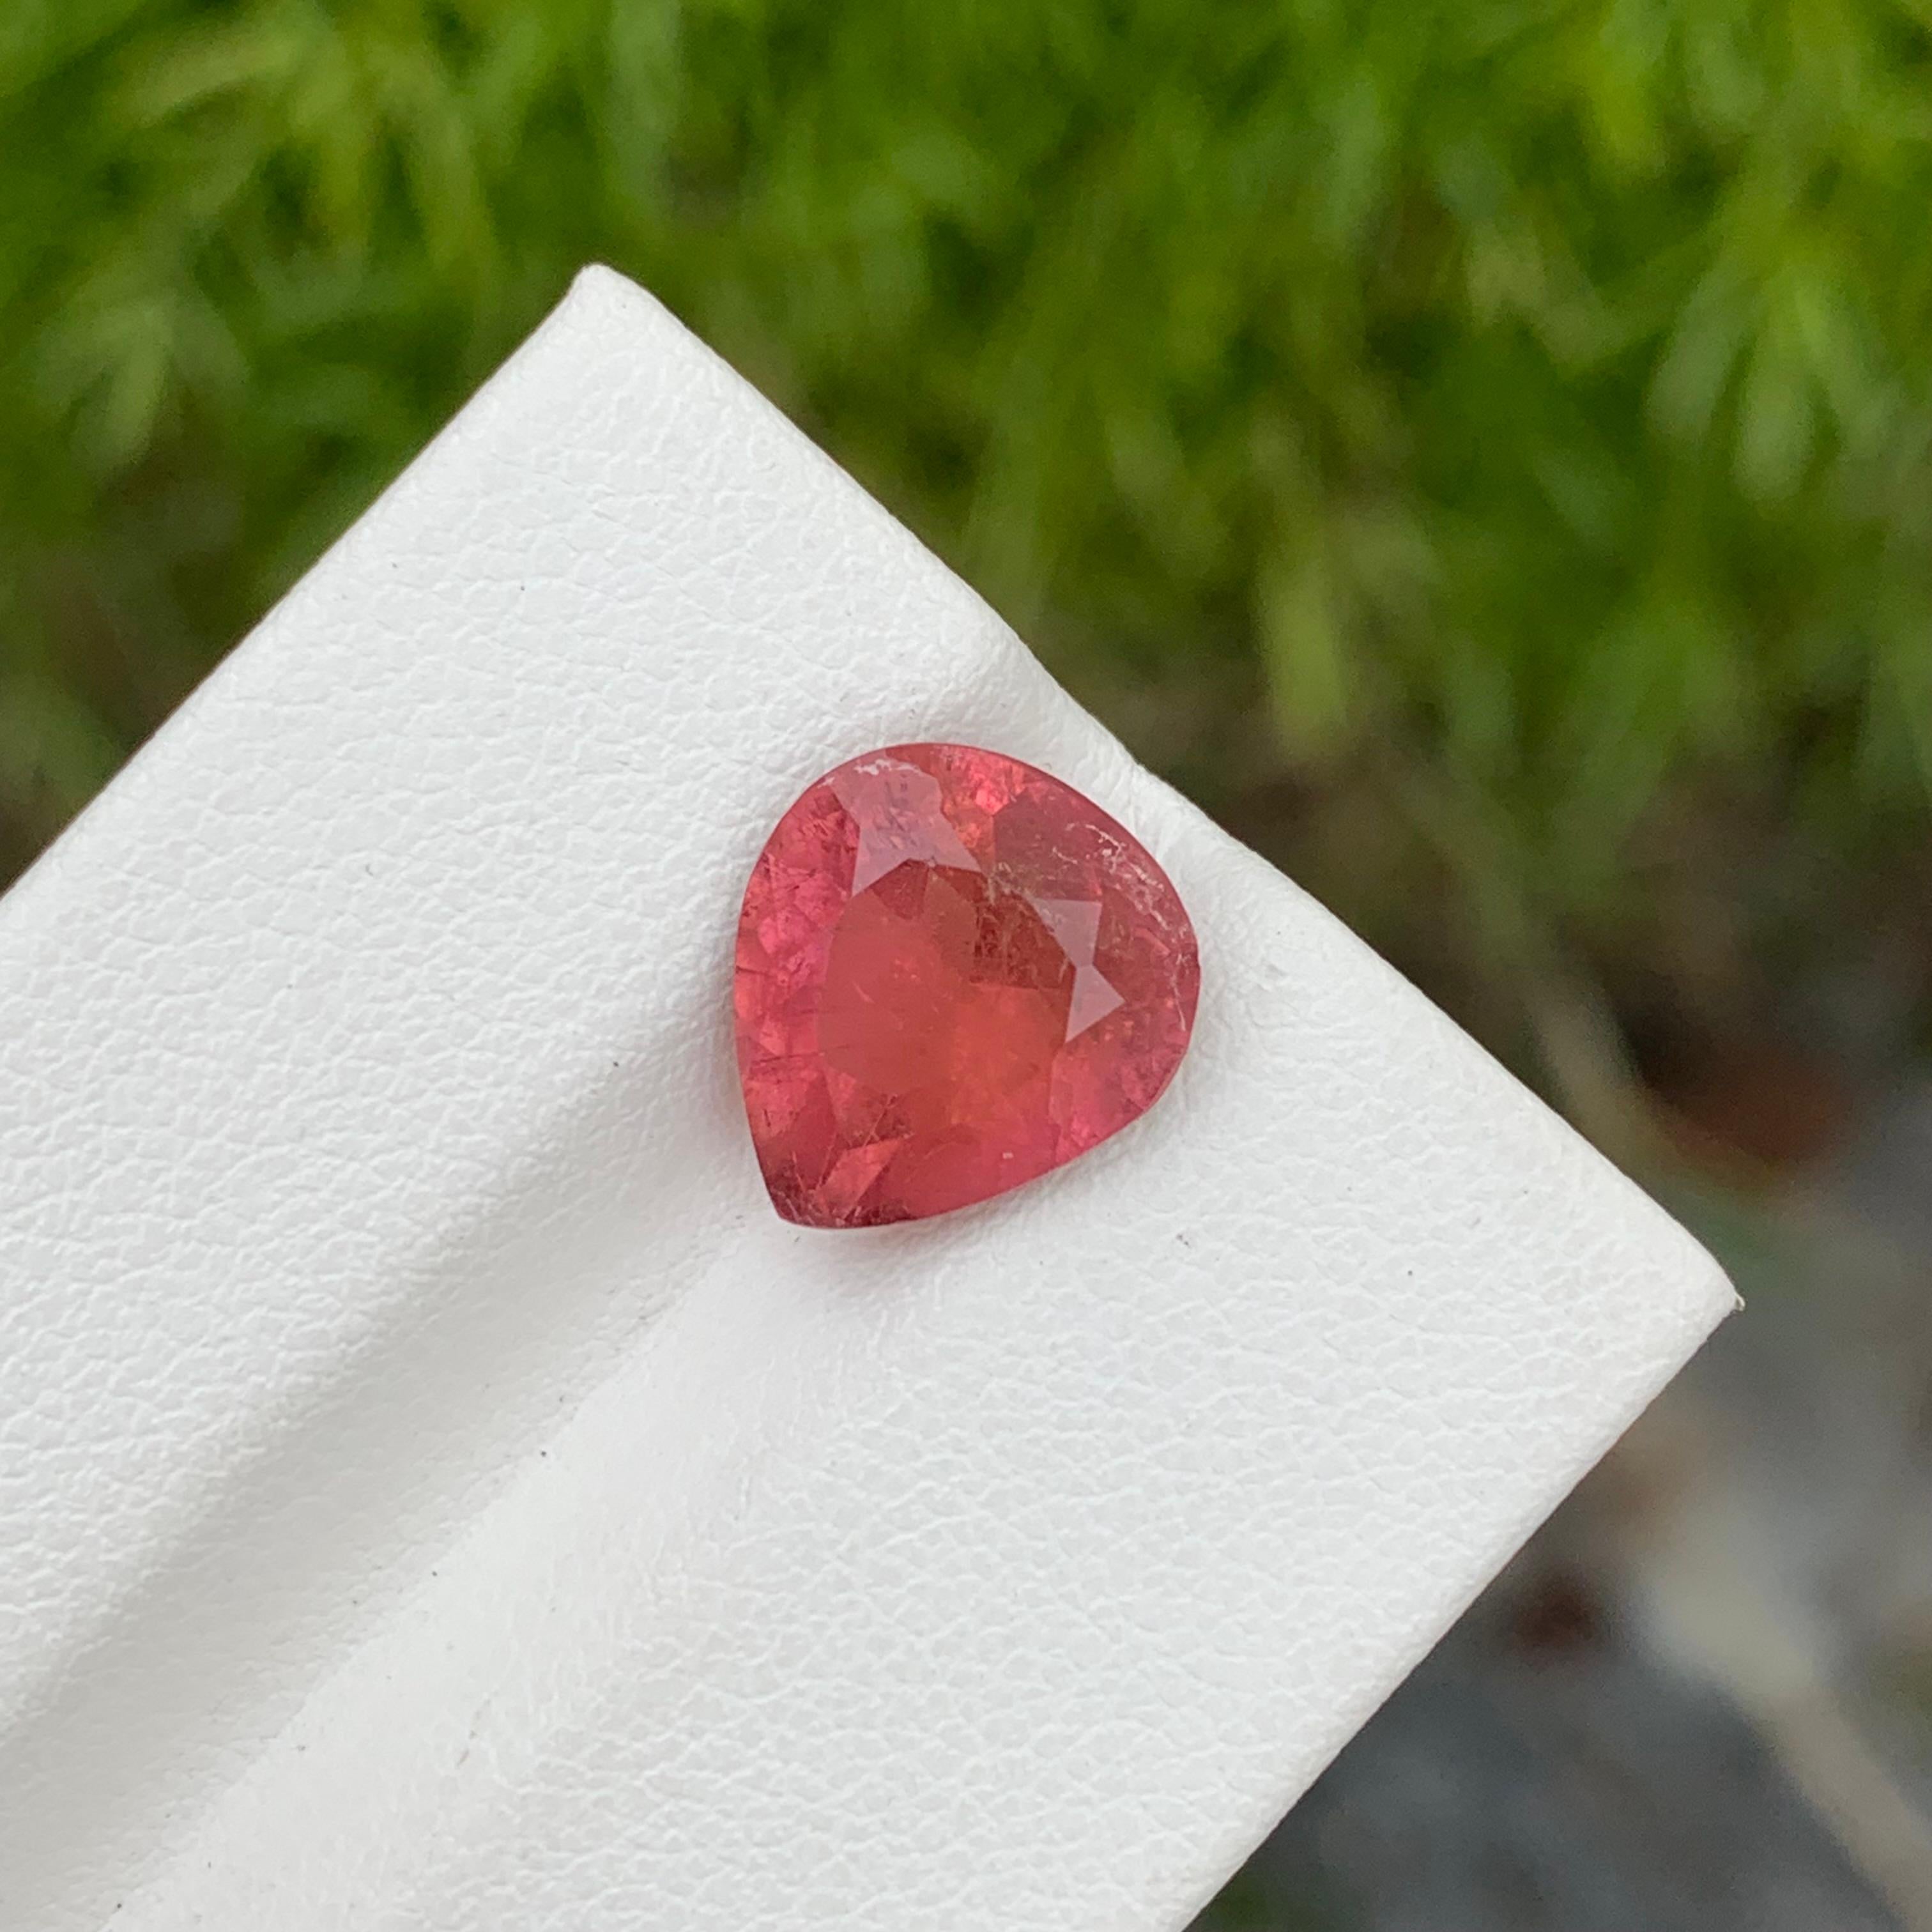 Loose Rubellite Tourmaline

Weight: 3.85 Carats
Dimension: 11.3 x 10.1 x 5.8 Mm
Origin: Afghanistan
Shape: Pear 
Color: Peach Pink 
Certificate: On Demand

Rubellite tourmaline, often regarded as the 